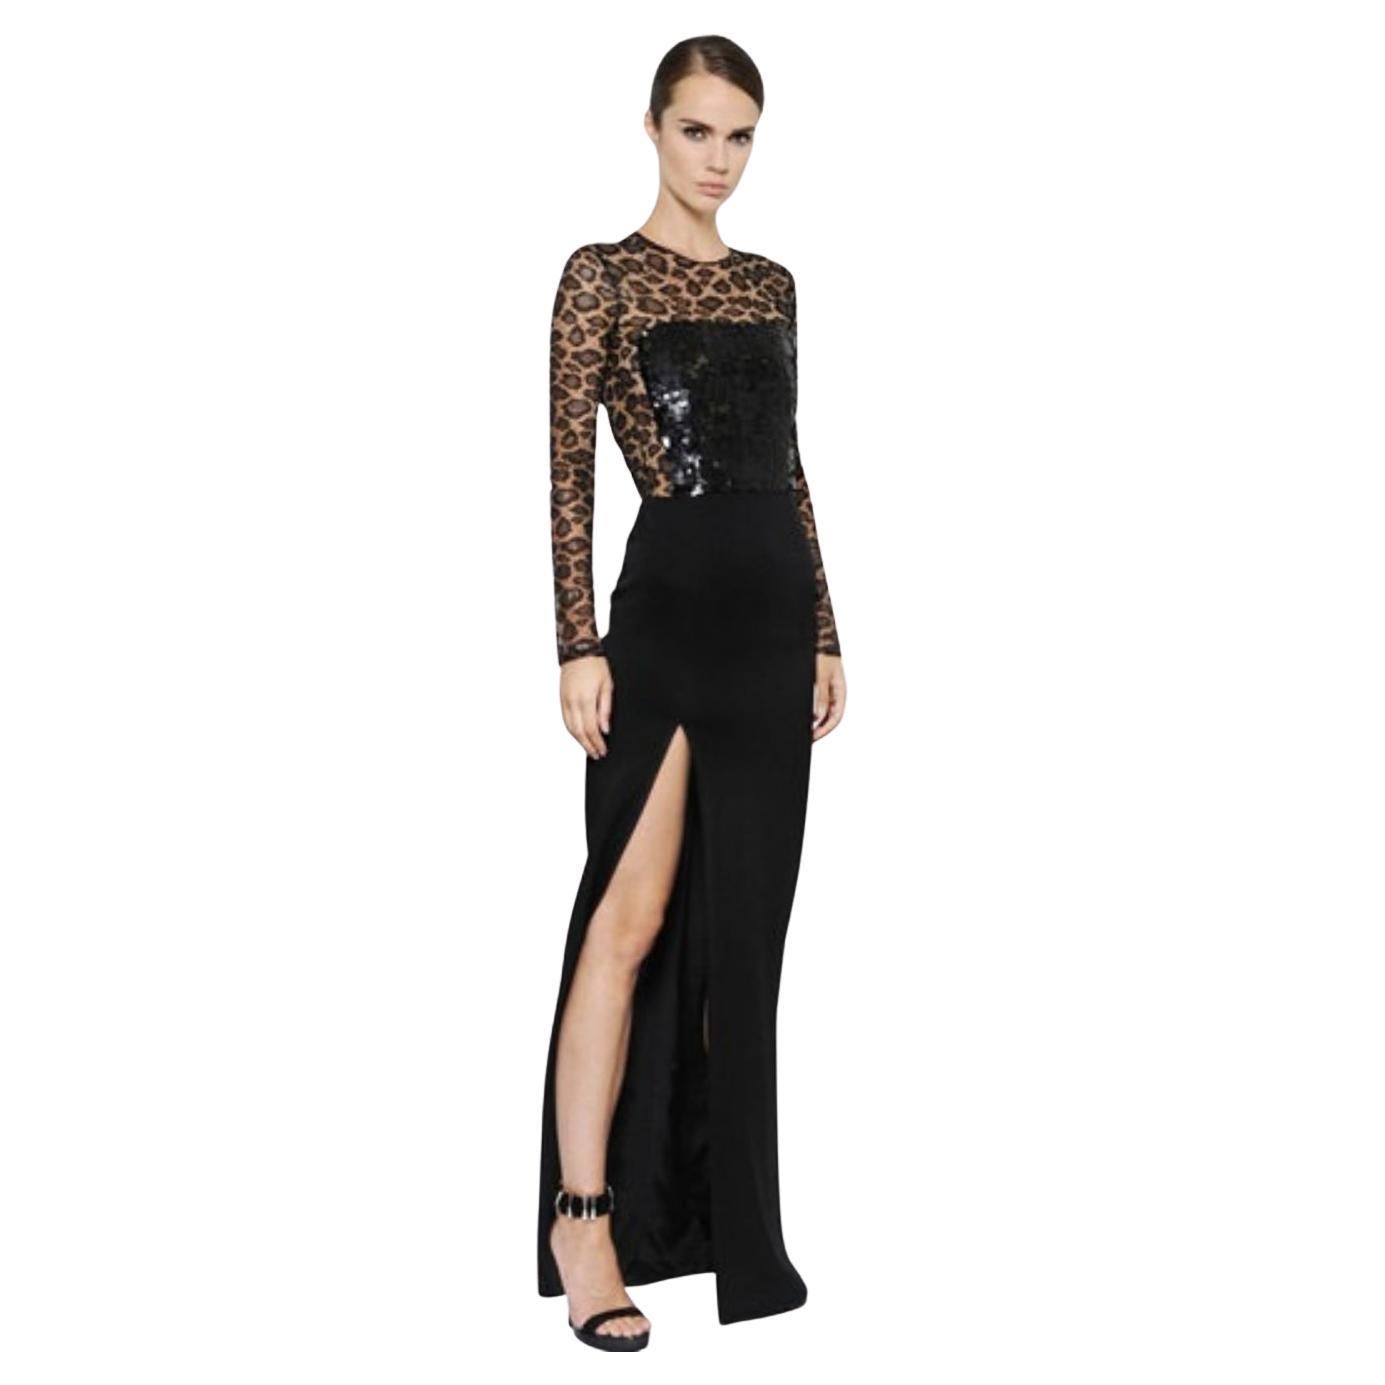  Alexander McQueen Sequin Embellished Lace Mesh Transparent Gown Maxi Dress For Sale